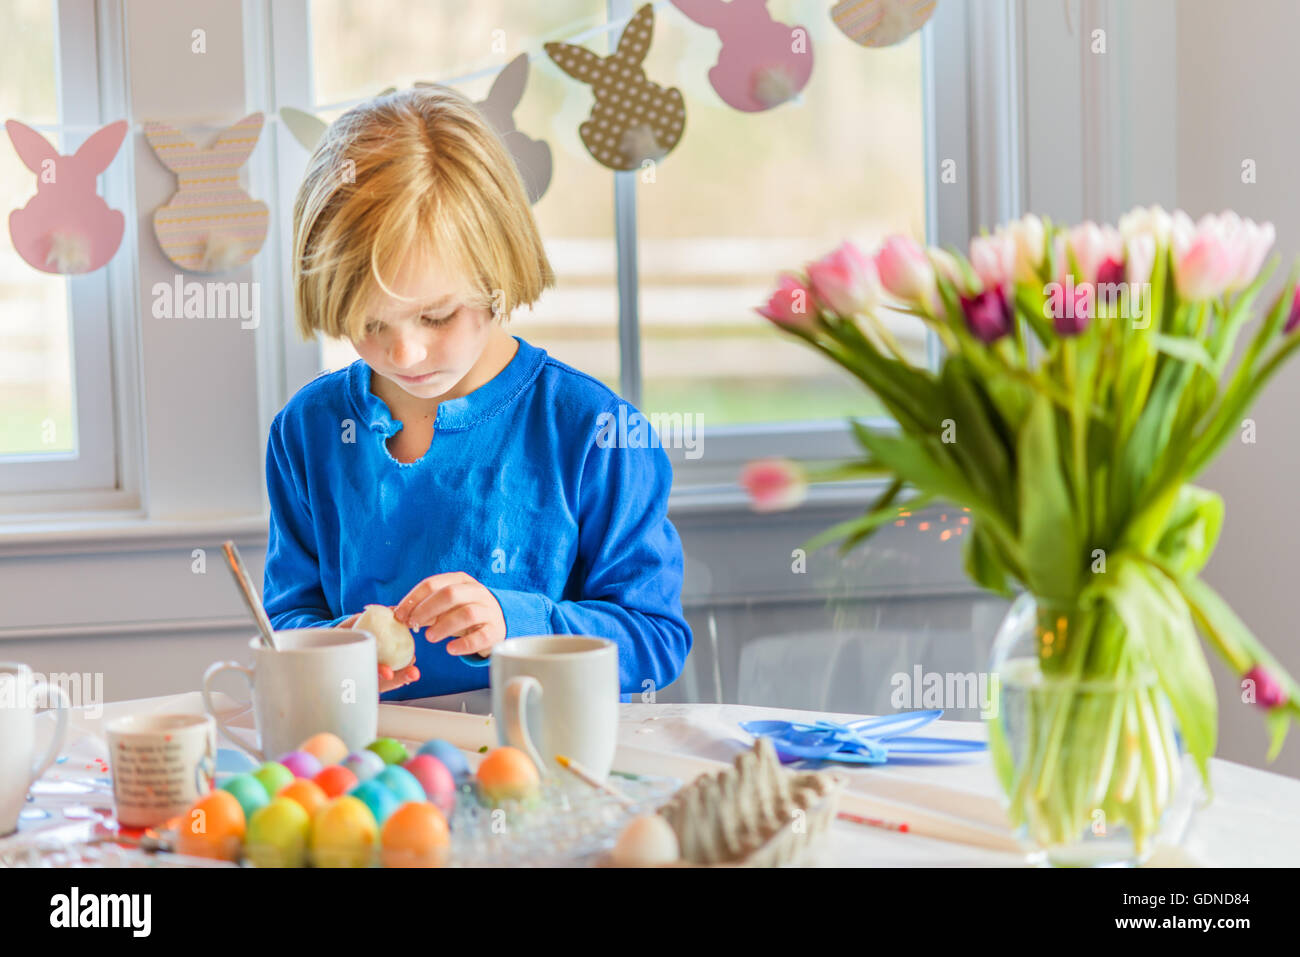 Boy at table decorating eggs for Easter Stock Photo